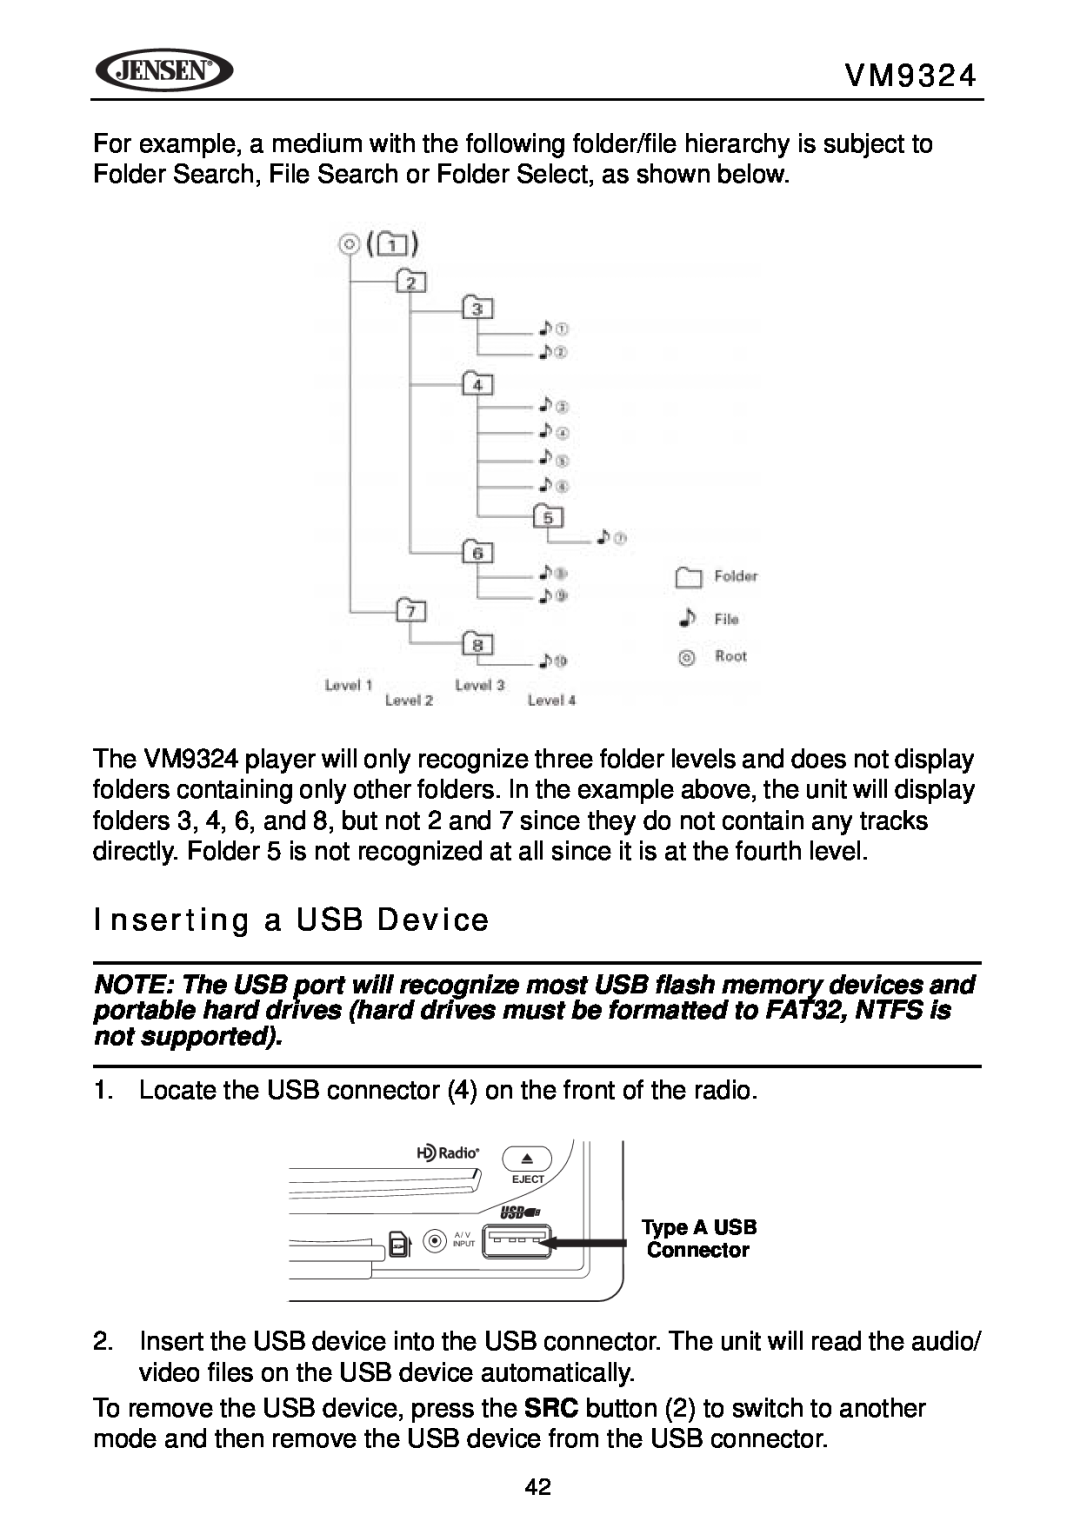 Jensen VM9324 manual Inserting a USB Device, Type A USB Connector 